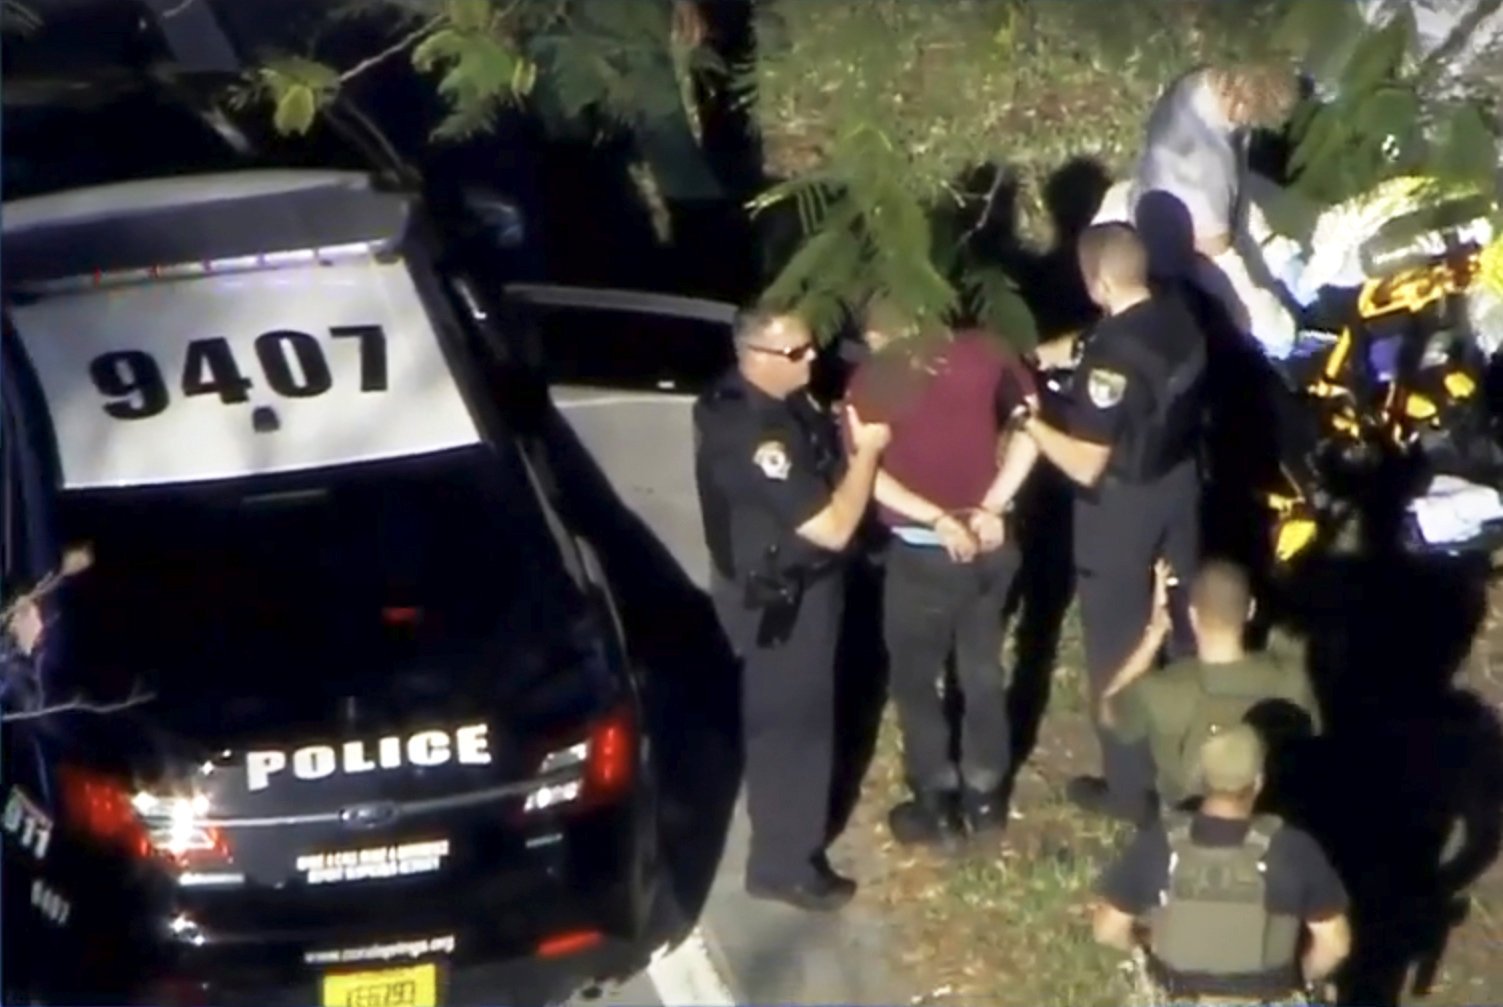 A man placed in handcuffs is led by police near Marjory Stoneman Douglas High School following a shooting incident in Parkland, Fla. Feb. 14, 2018 in a still image from video. (WSVN.com/Reuters)